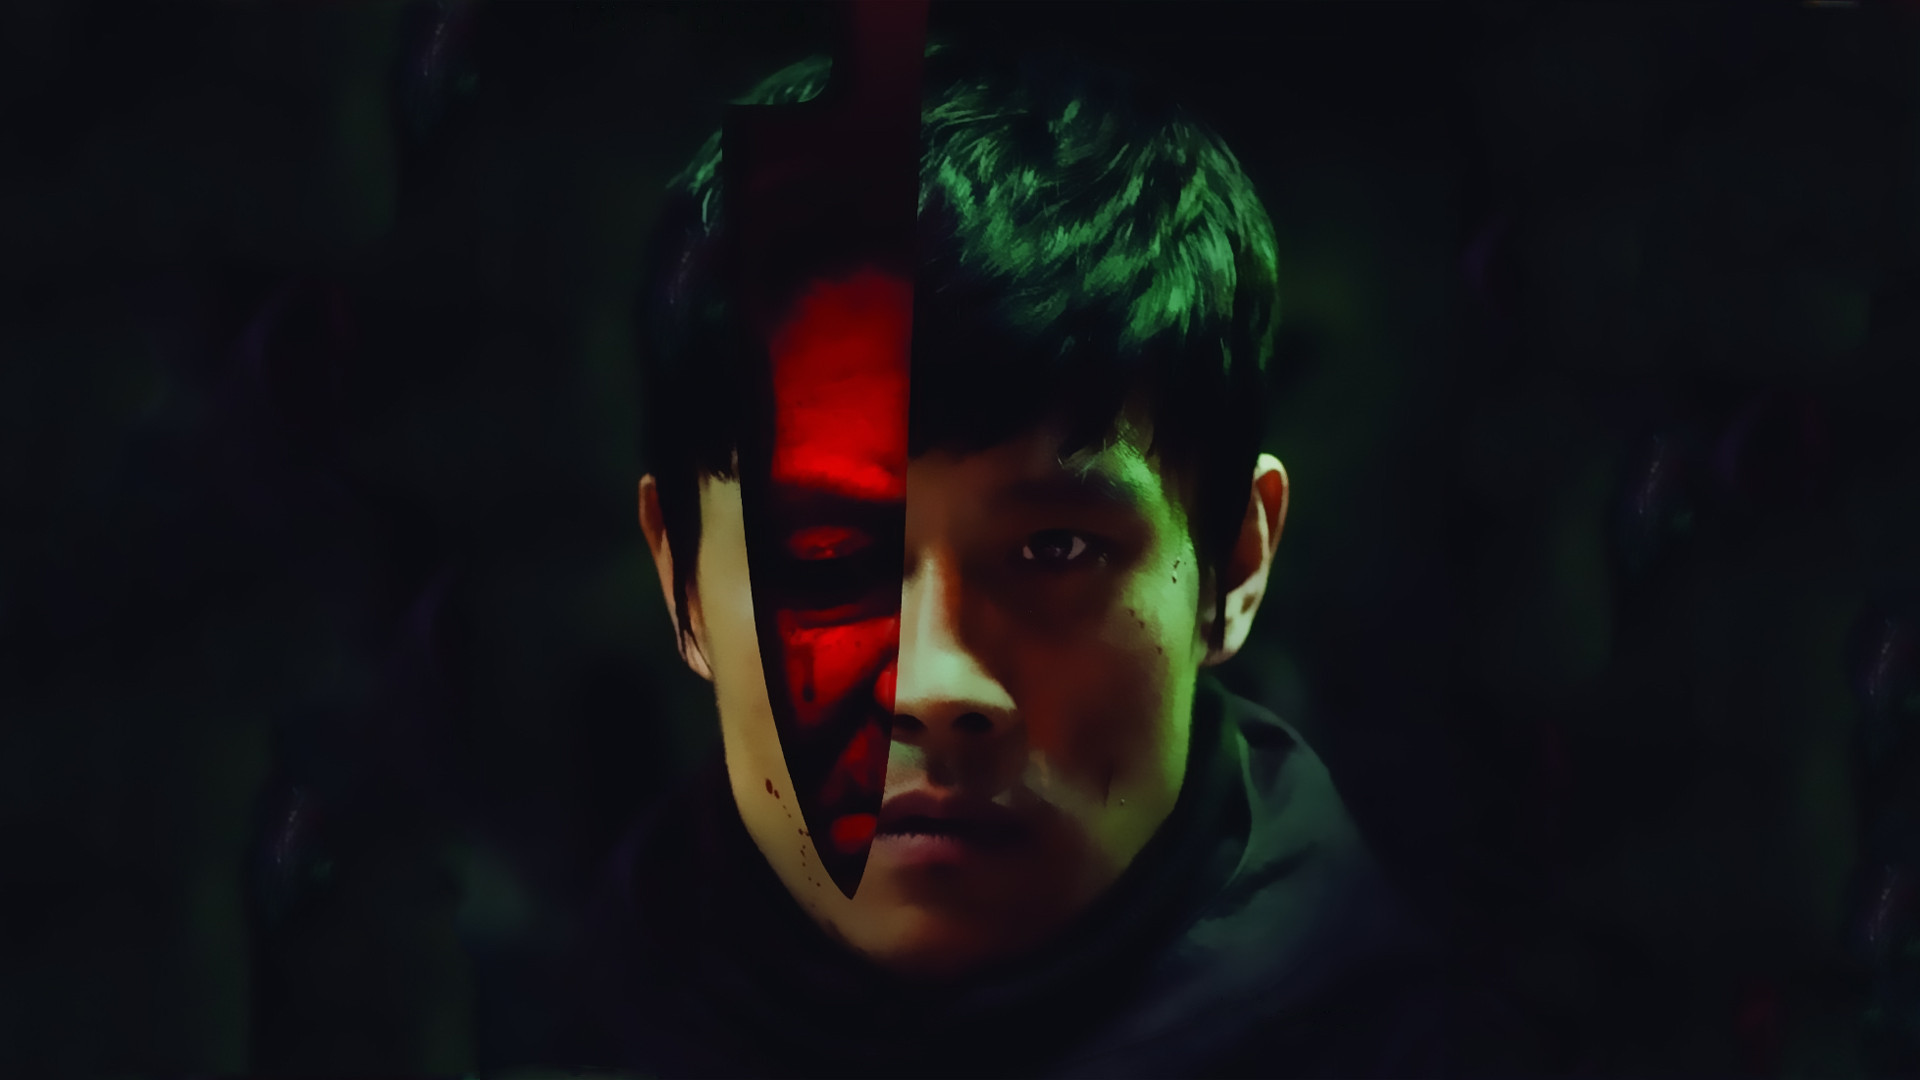 1920x1080 I saw the Devil movie poster starring Min-sik Choi from Old boy directed by